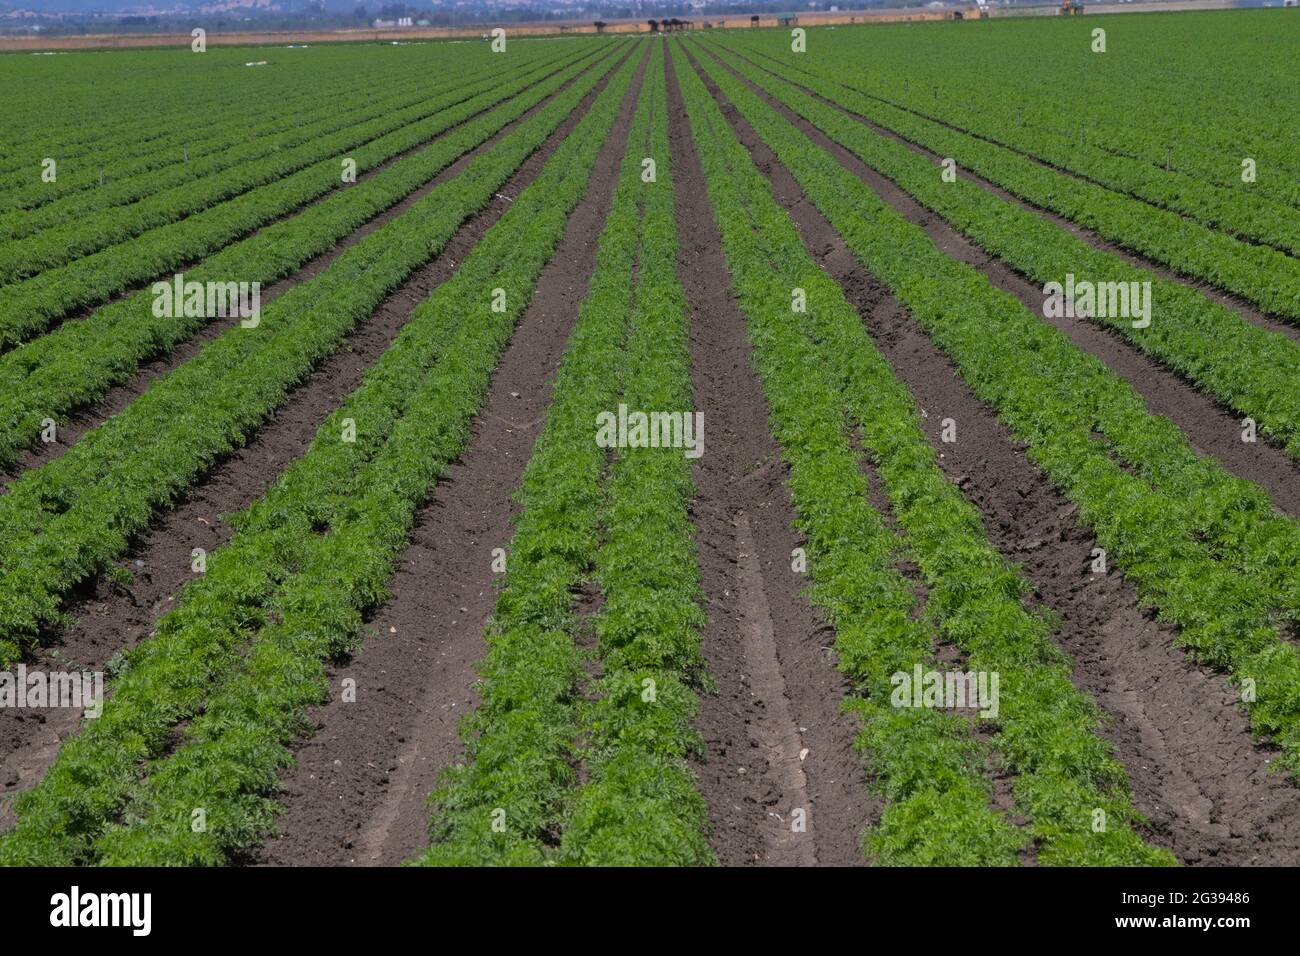 Commercial crop of carrots growing on private farmland in the Hollister Valley, San Benito County, California. Stock Photo